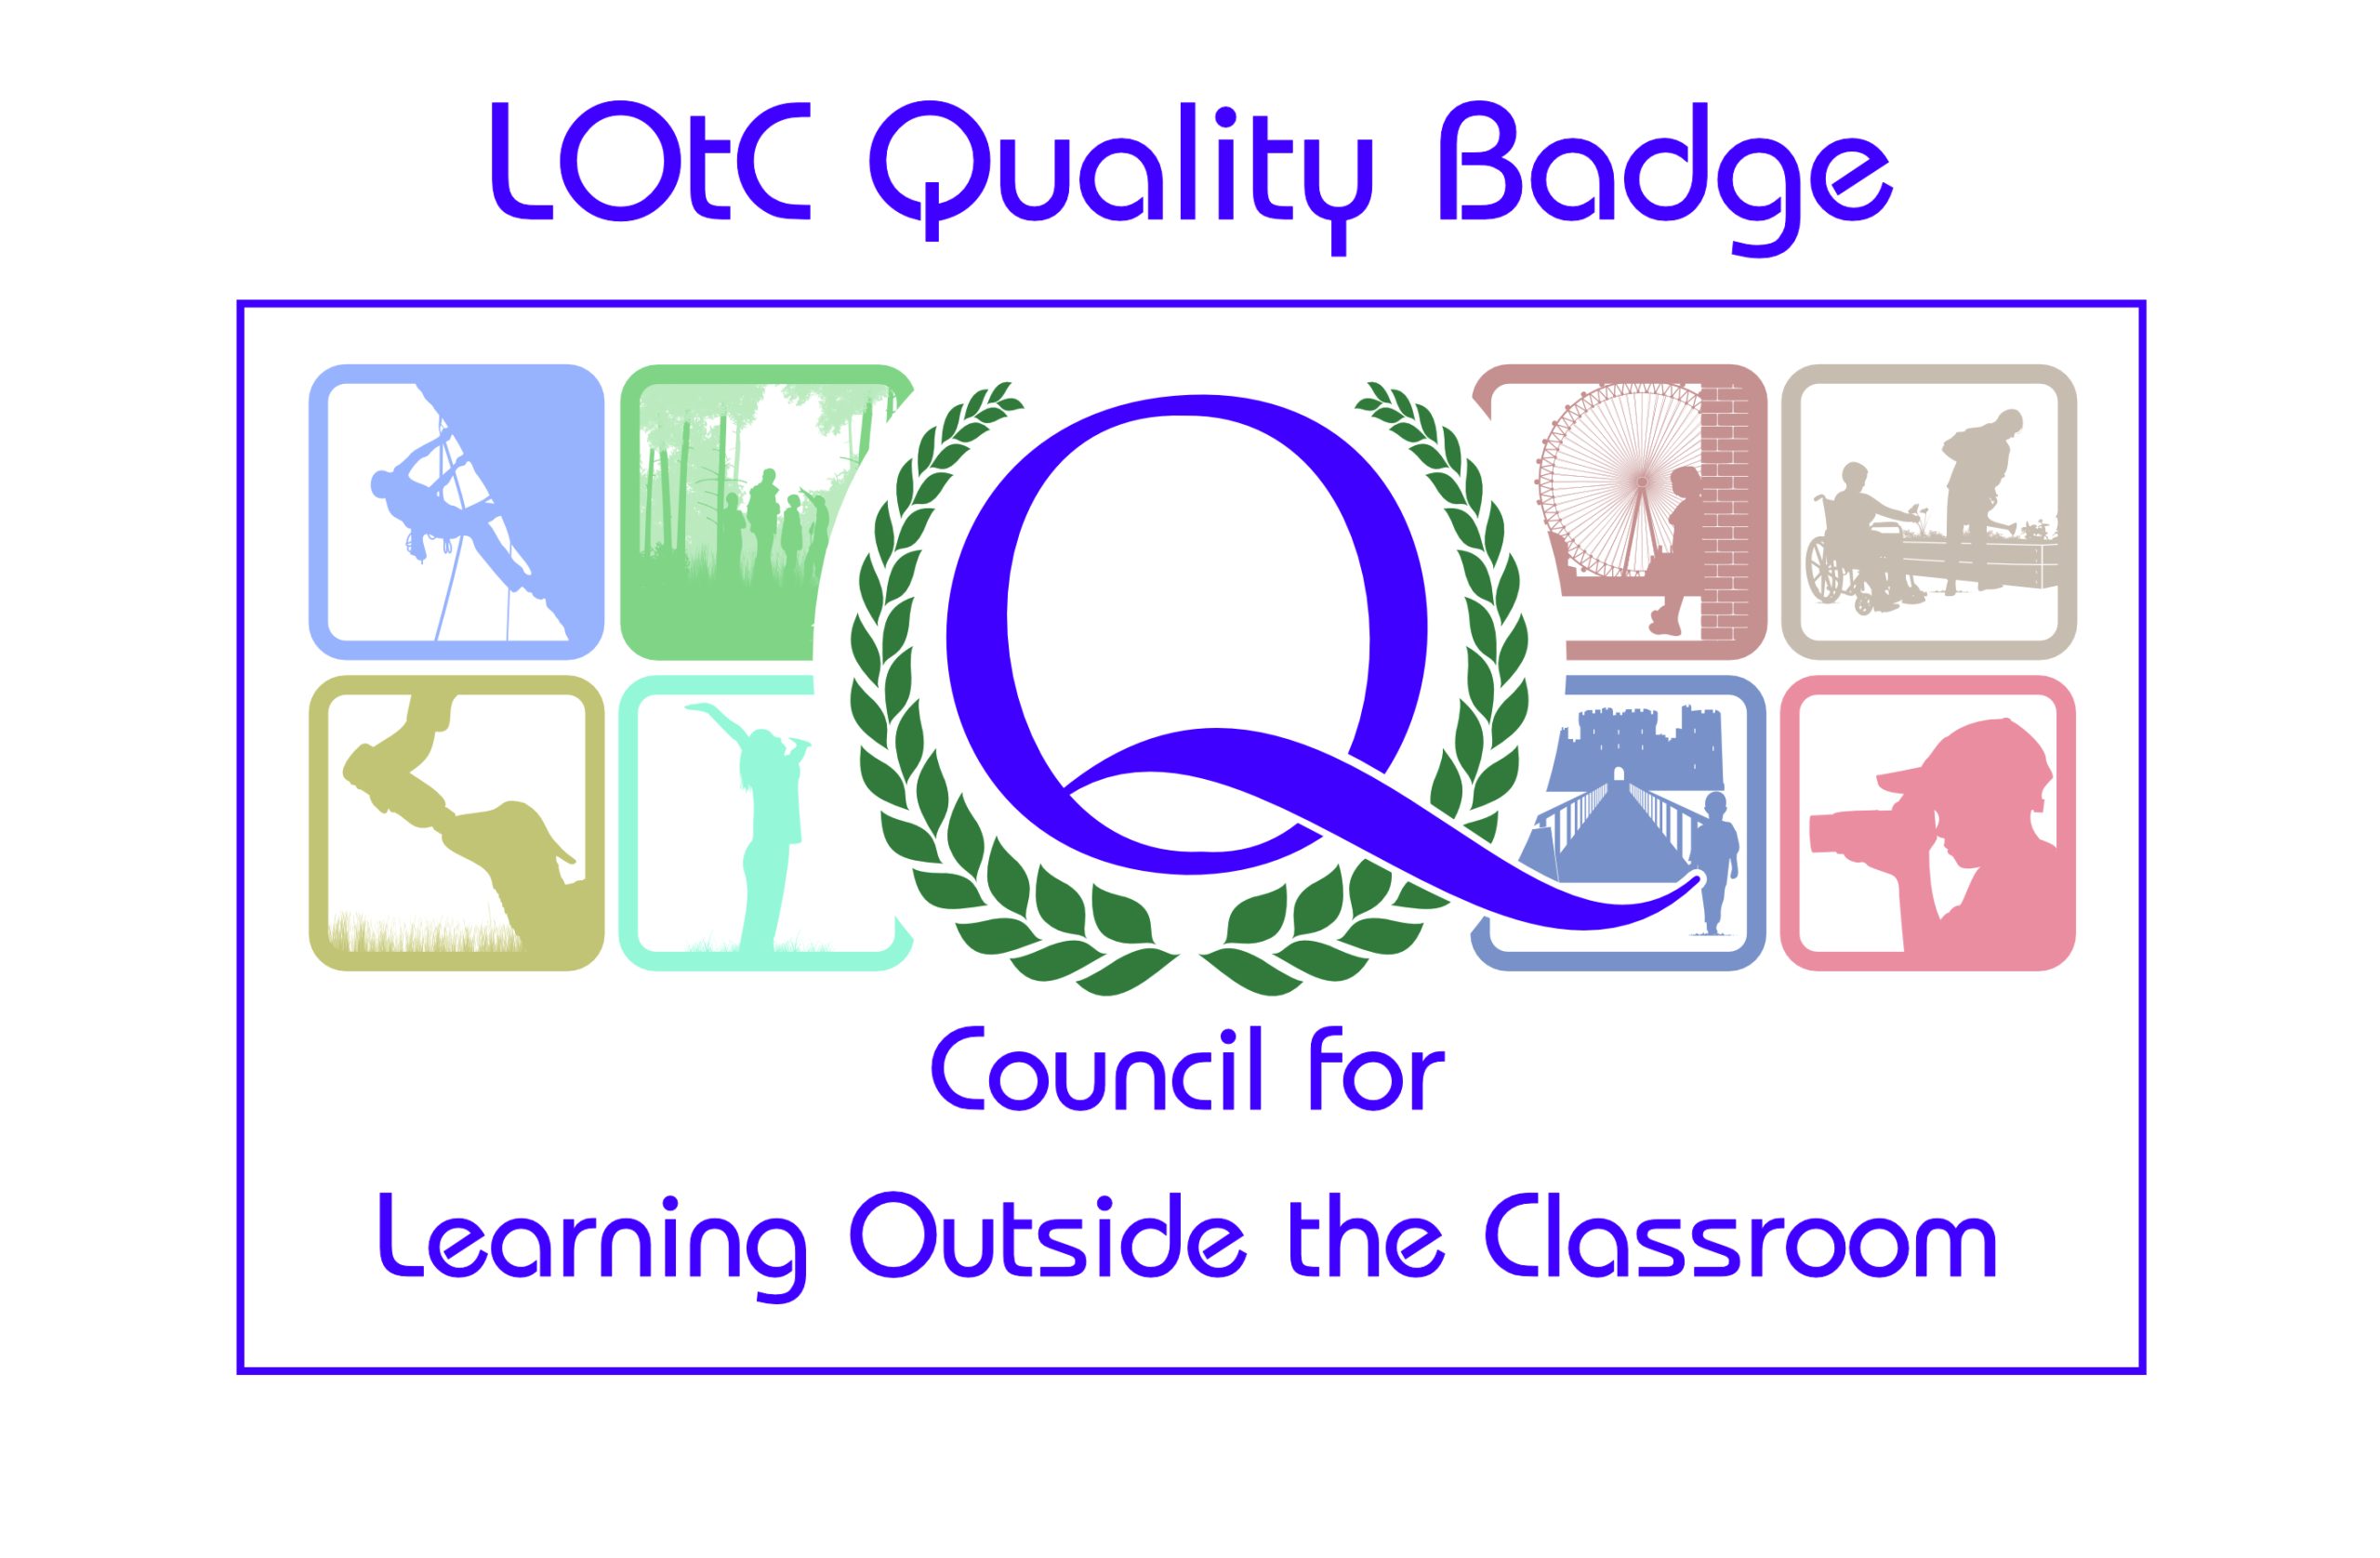 The Council for Learning Outside the Classroom Quality Badge logo